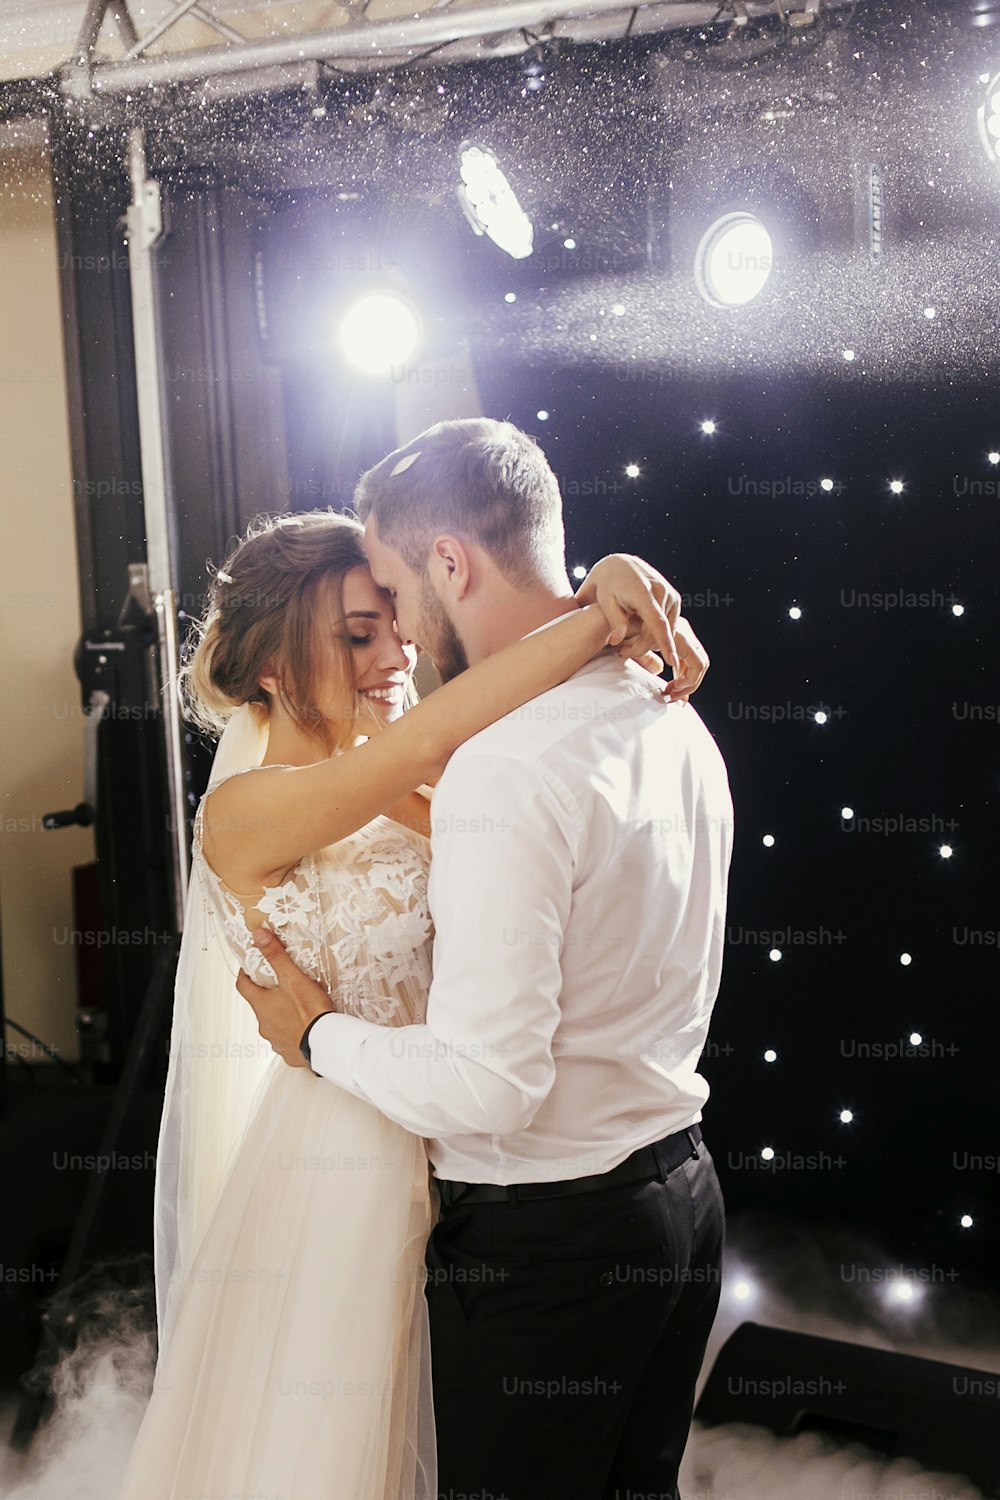 Gorgeous bride and stylish groom gently dancing at wedding reception. Happy wedding couple performing first dance in restaurant. Romantic moments of newlyweds